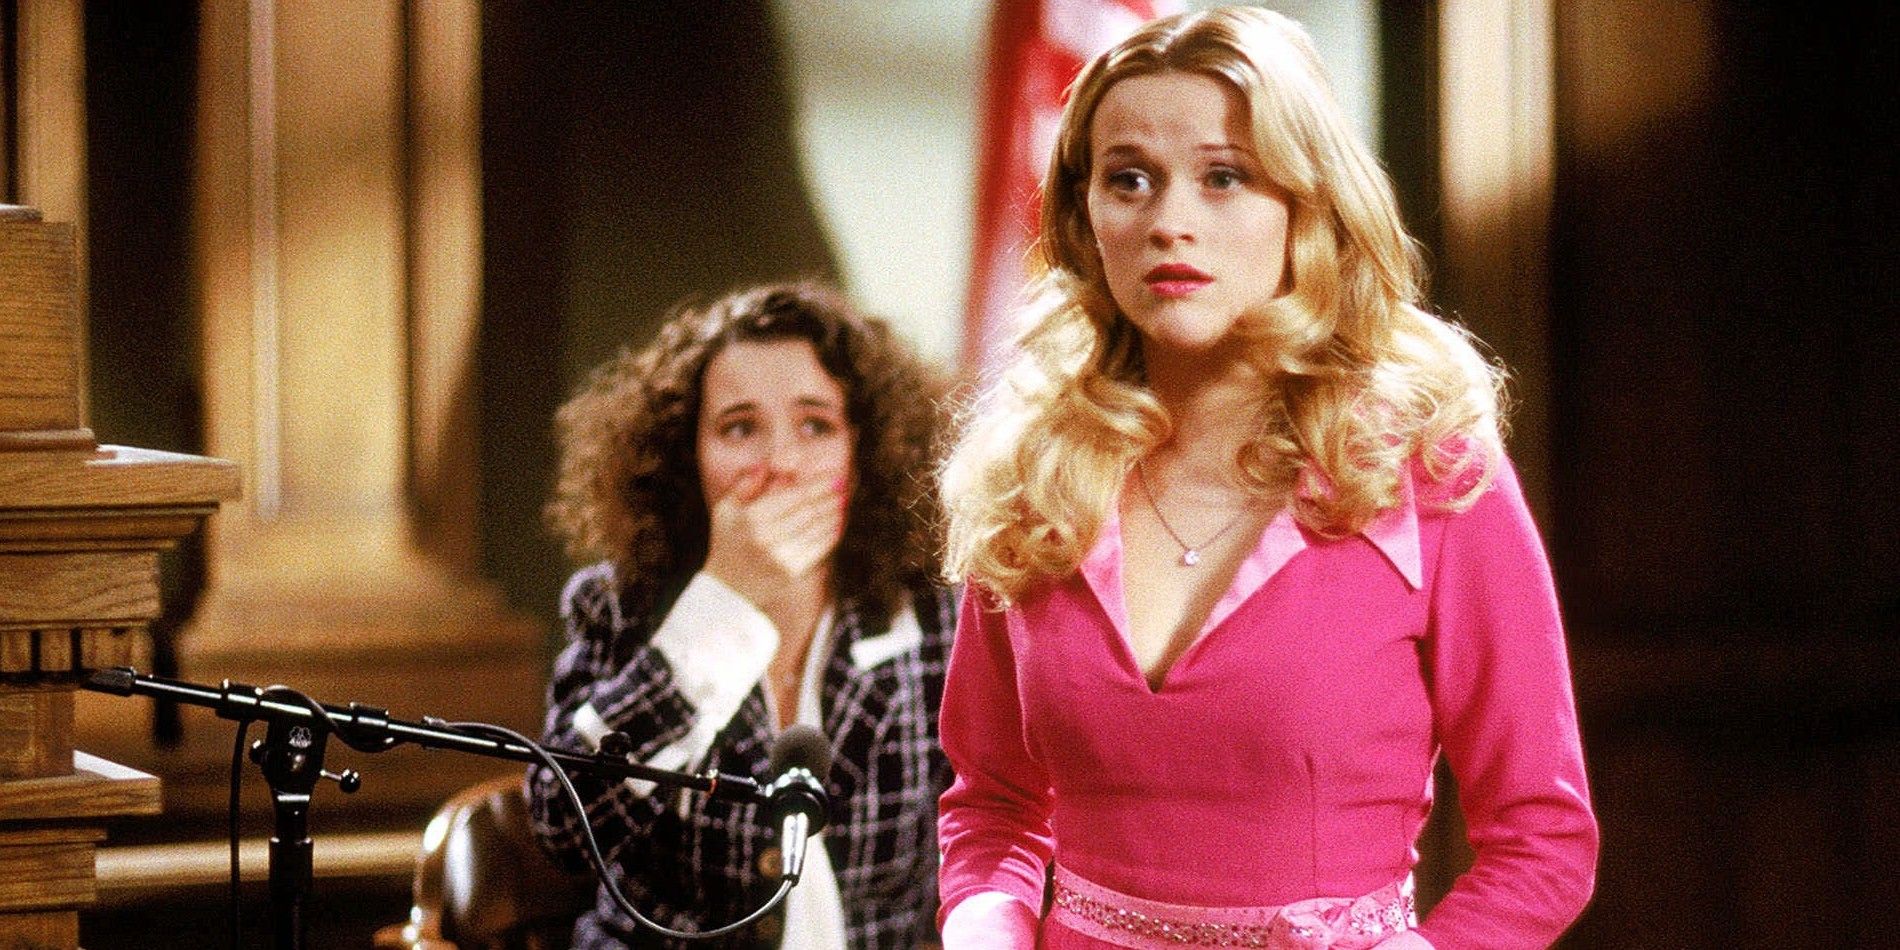 Elle walks away from Chutney on the witness stand in surprise in Legally Blonde